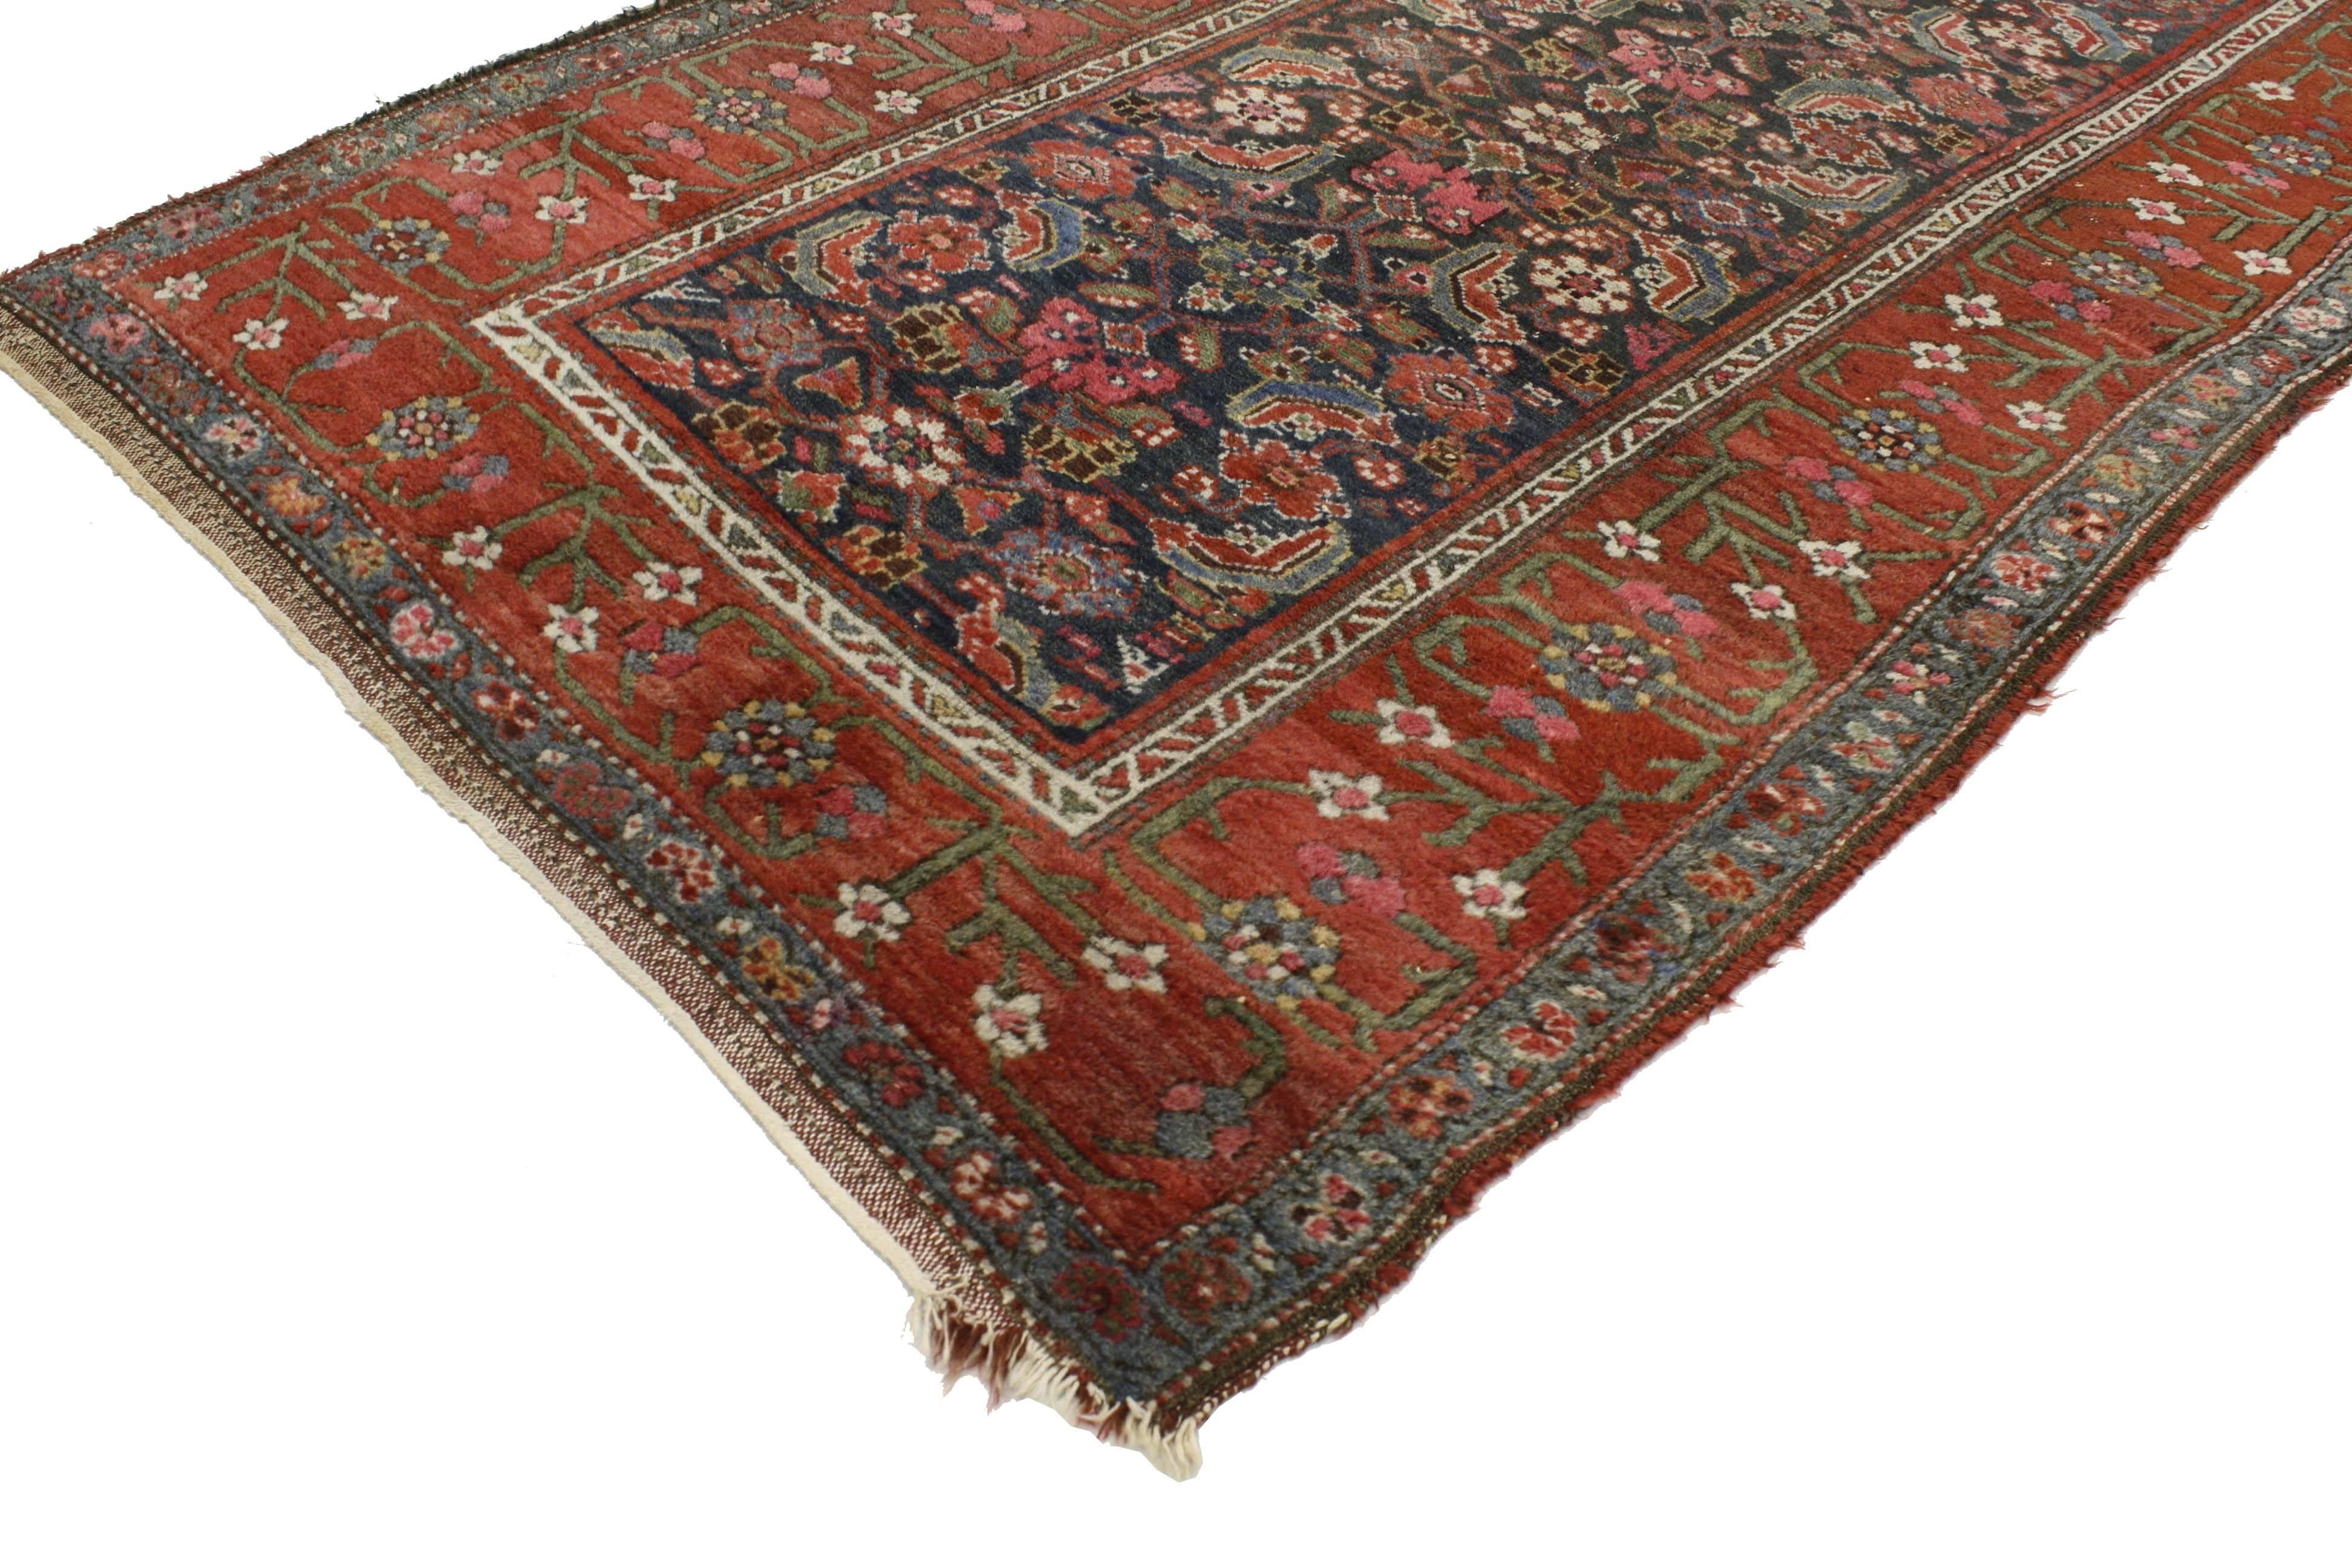 76925 Antique Malayer Persian Runner with Modern Traditional Style 03'01 x 16'01. With its timeless design and well-balanced symmetry, this hand-knotted wool antique Persian Malayer runner features an all-over Herati pattern on an abrashed navy blue